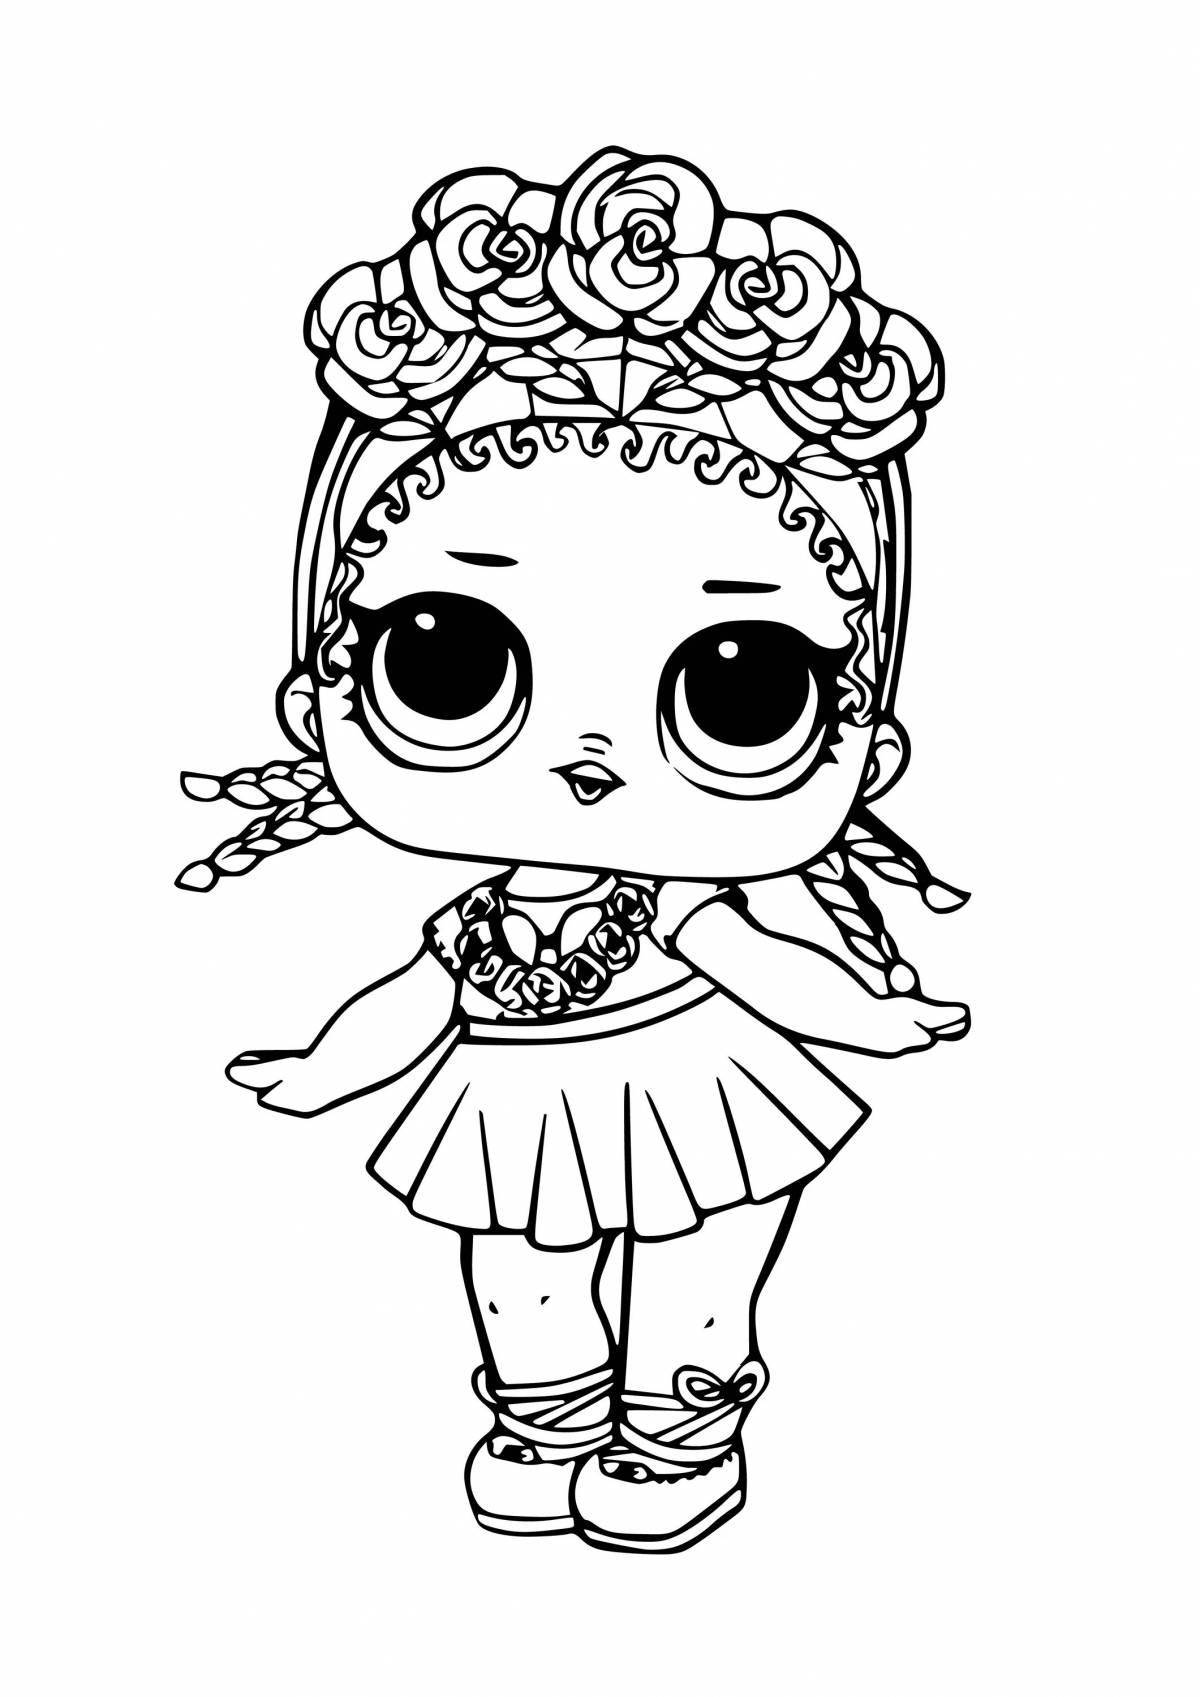 Colorful Lowe Dolls Coloring Page for Kids